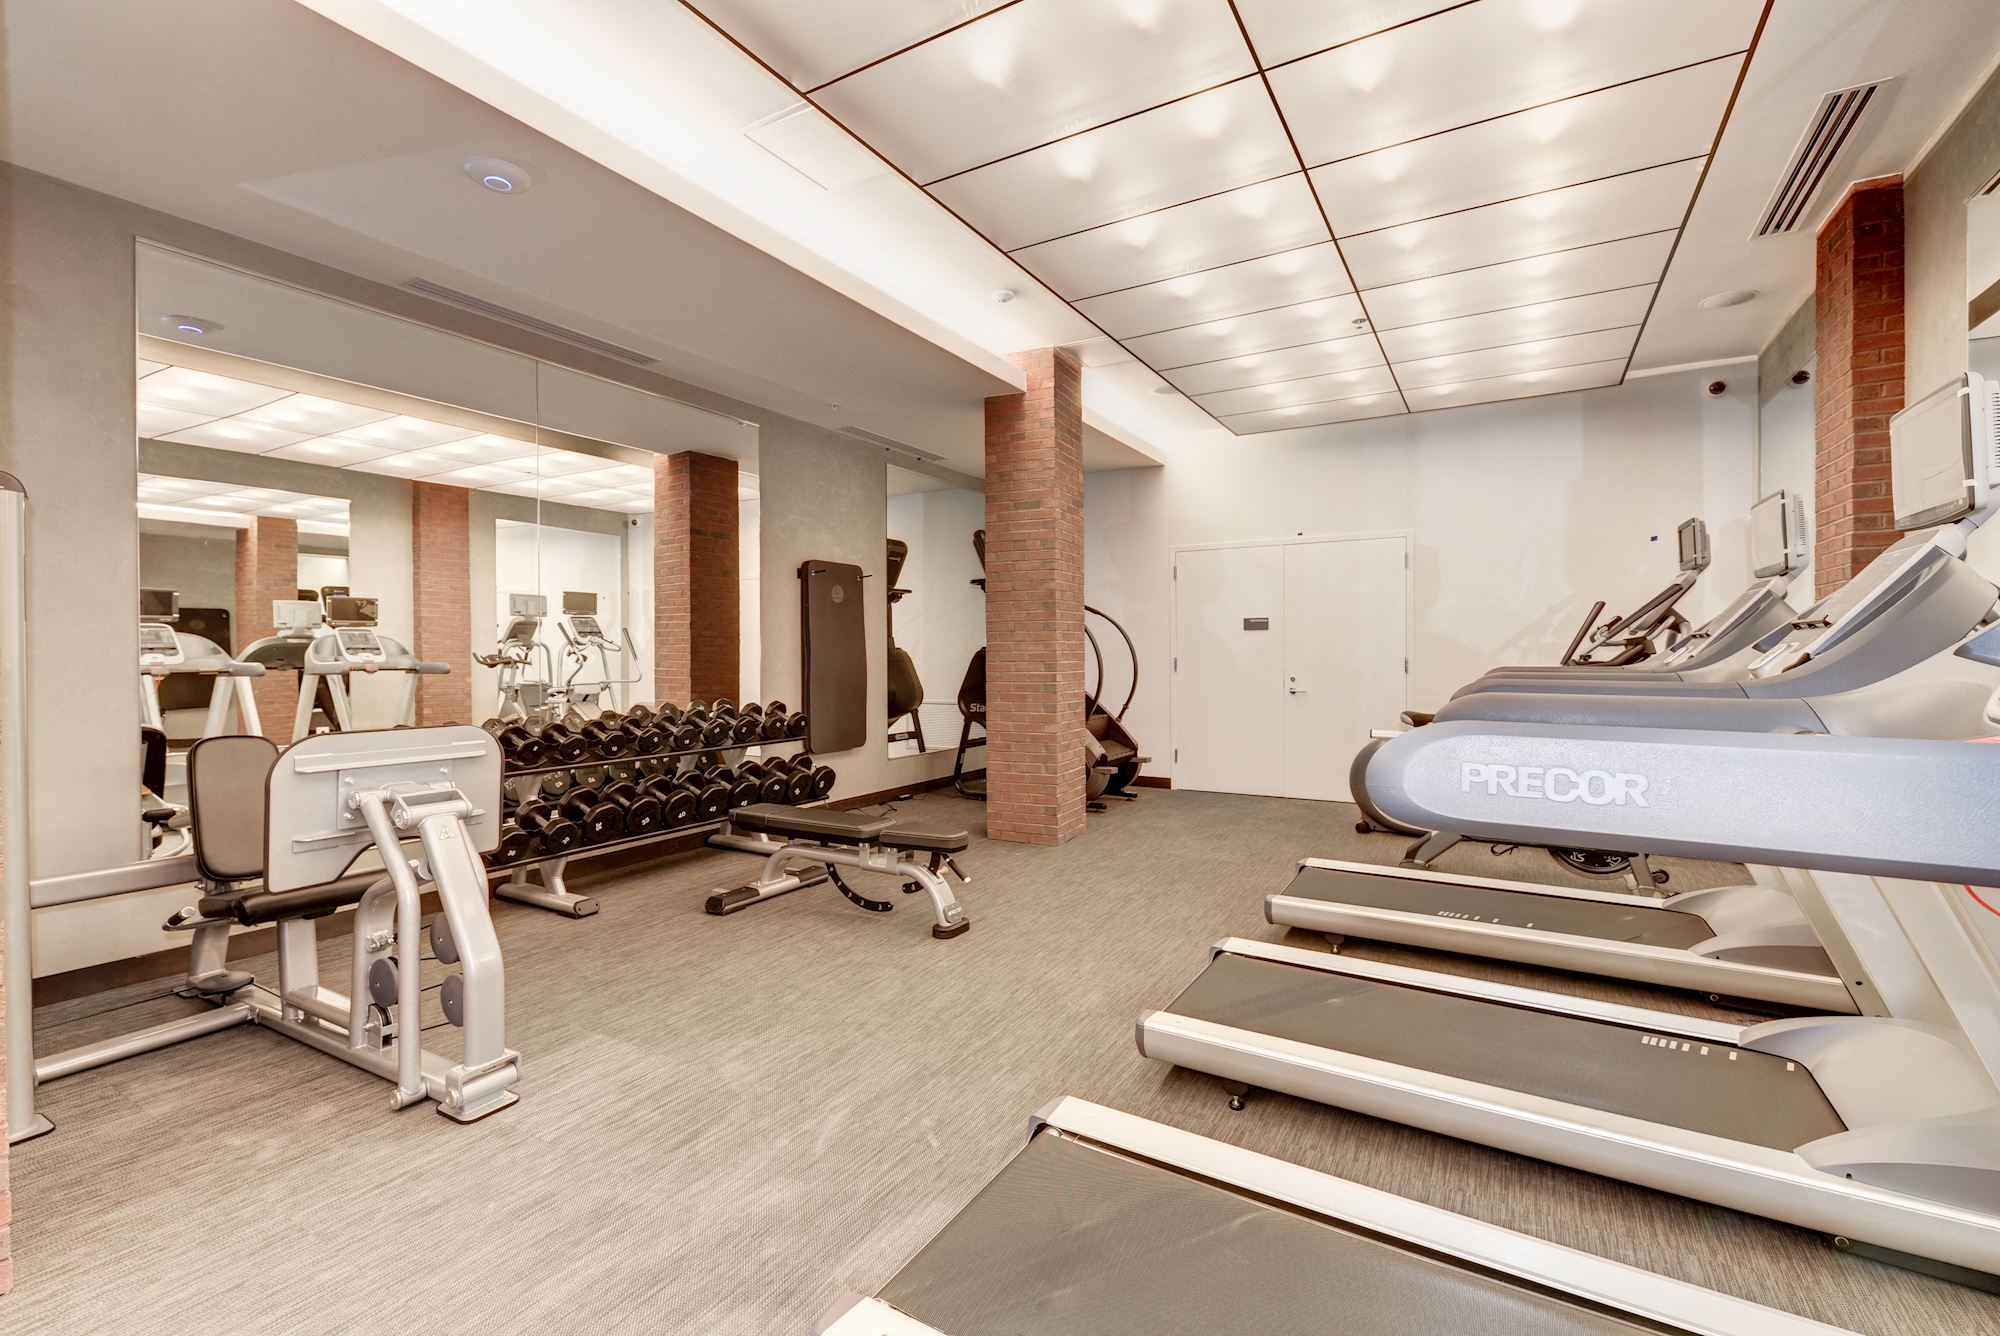 Fitness Center With Modern Equipment